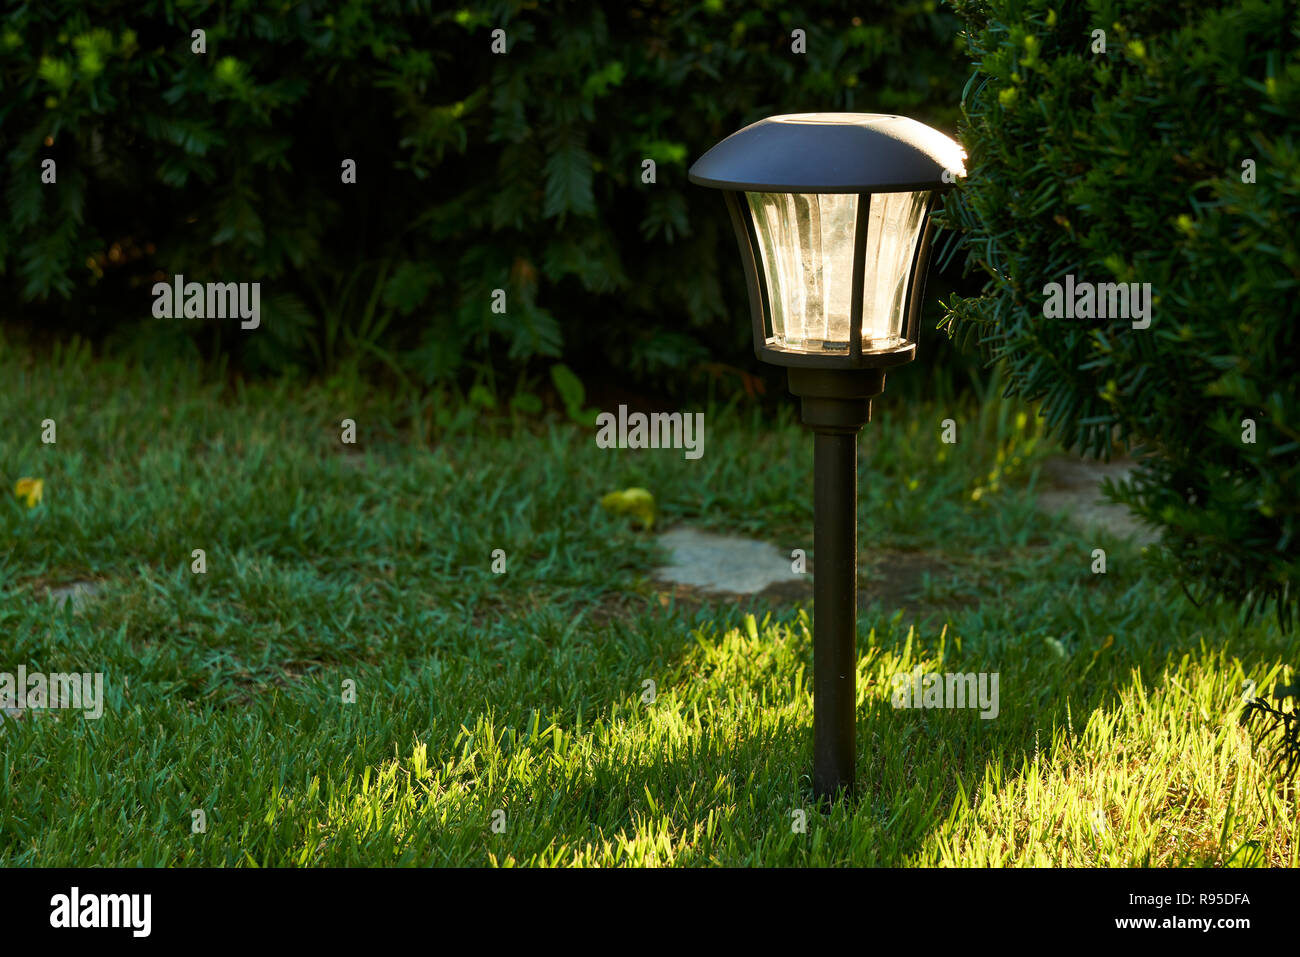 sunlight and solar lights for outdoor pathway in a garden Stock Photo